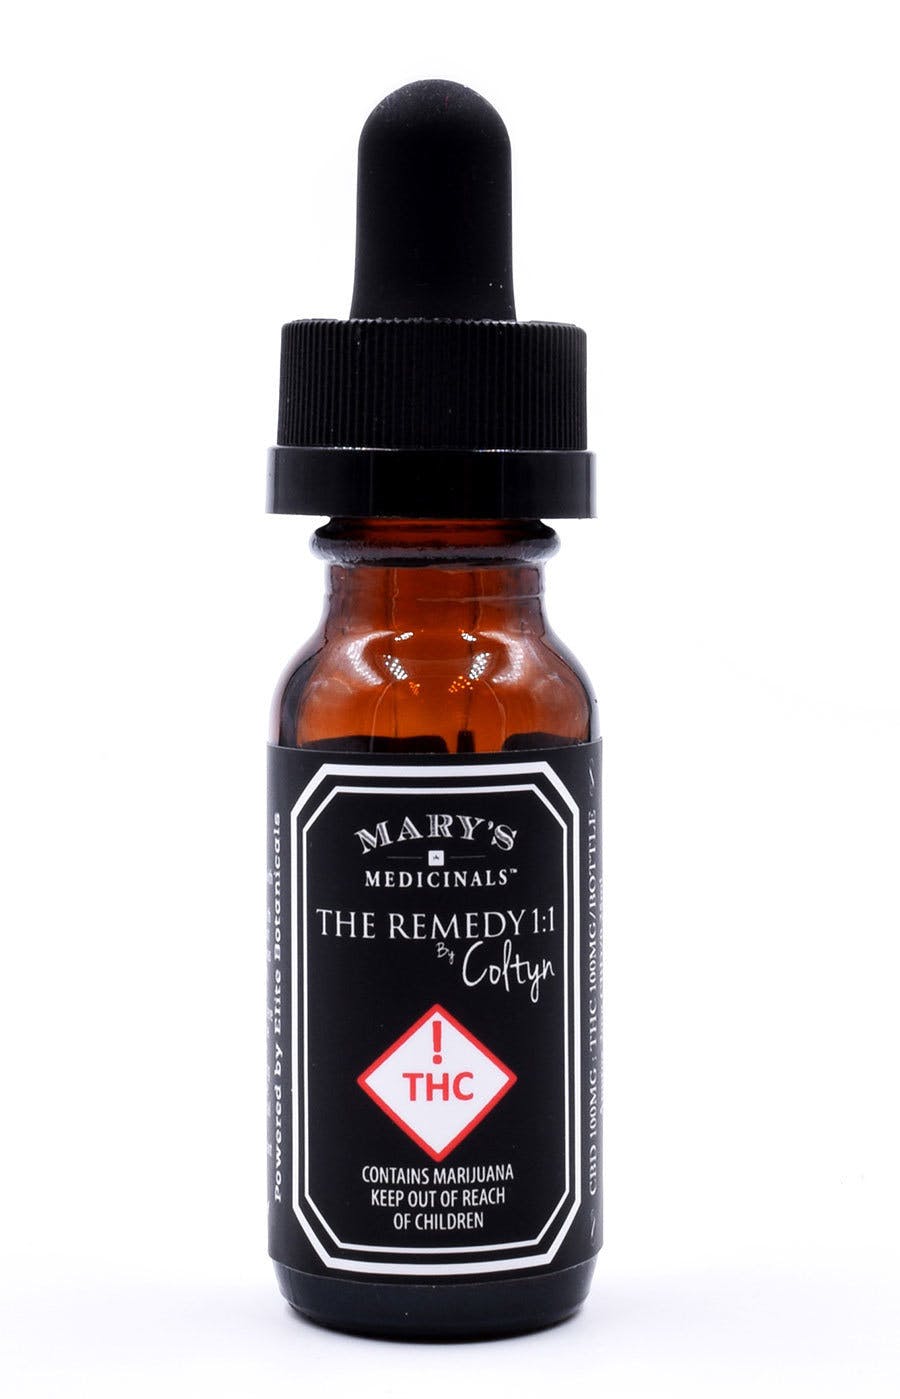 tincture-marys-medicinals-the-remedy-oil-11-tincture